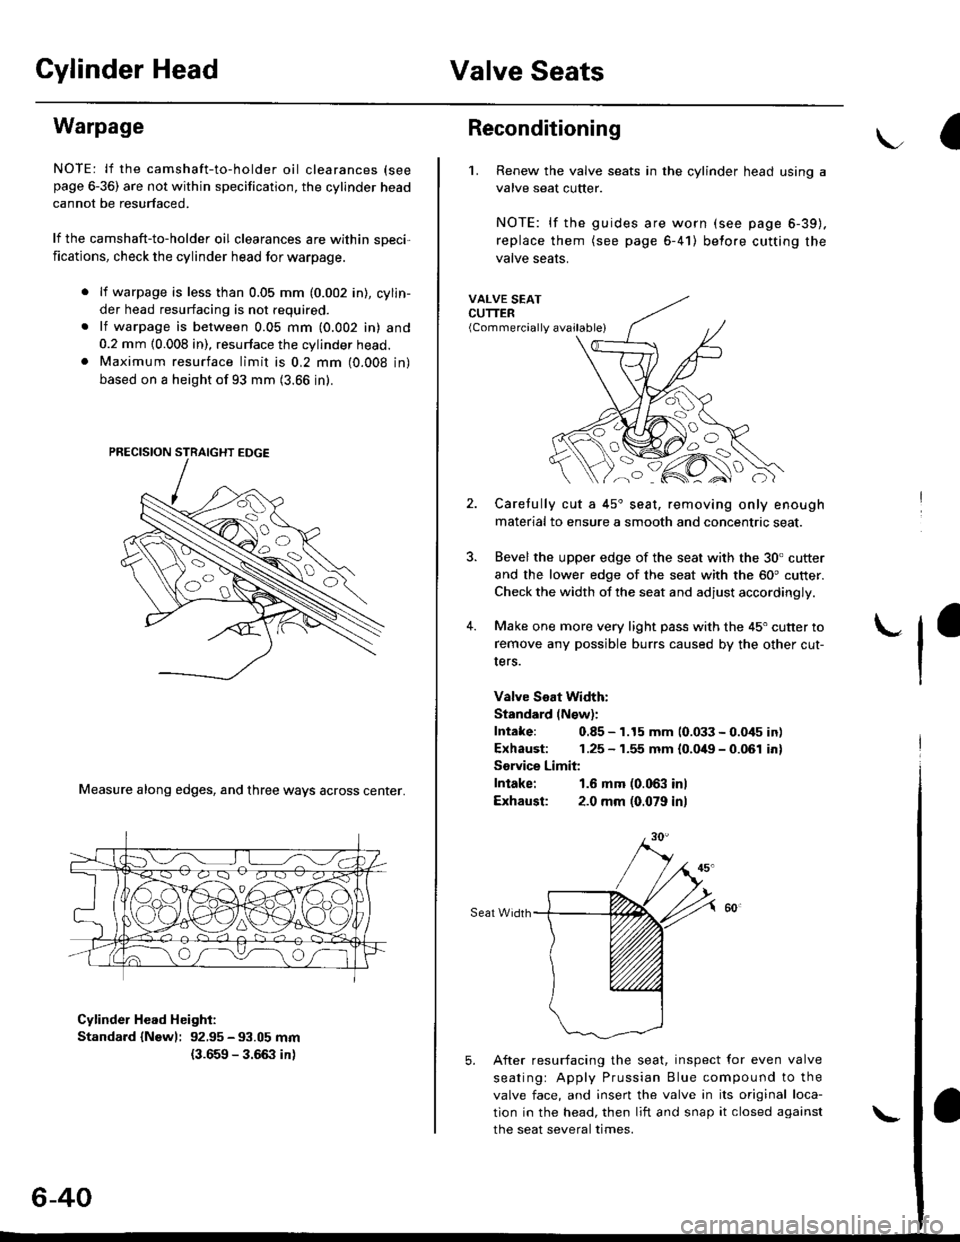 HONDA CIVIC 1998 6.G Workshop Manual Cylinder HeadValve Seats
Warpage
NOTE: lf the camshaft-to-holder oil clearances (see
page 6-36) are not within specification, the cylinder head
cannot be resurfaced.
lf the camshaft-to-holder oil clea